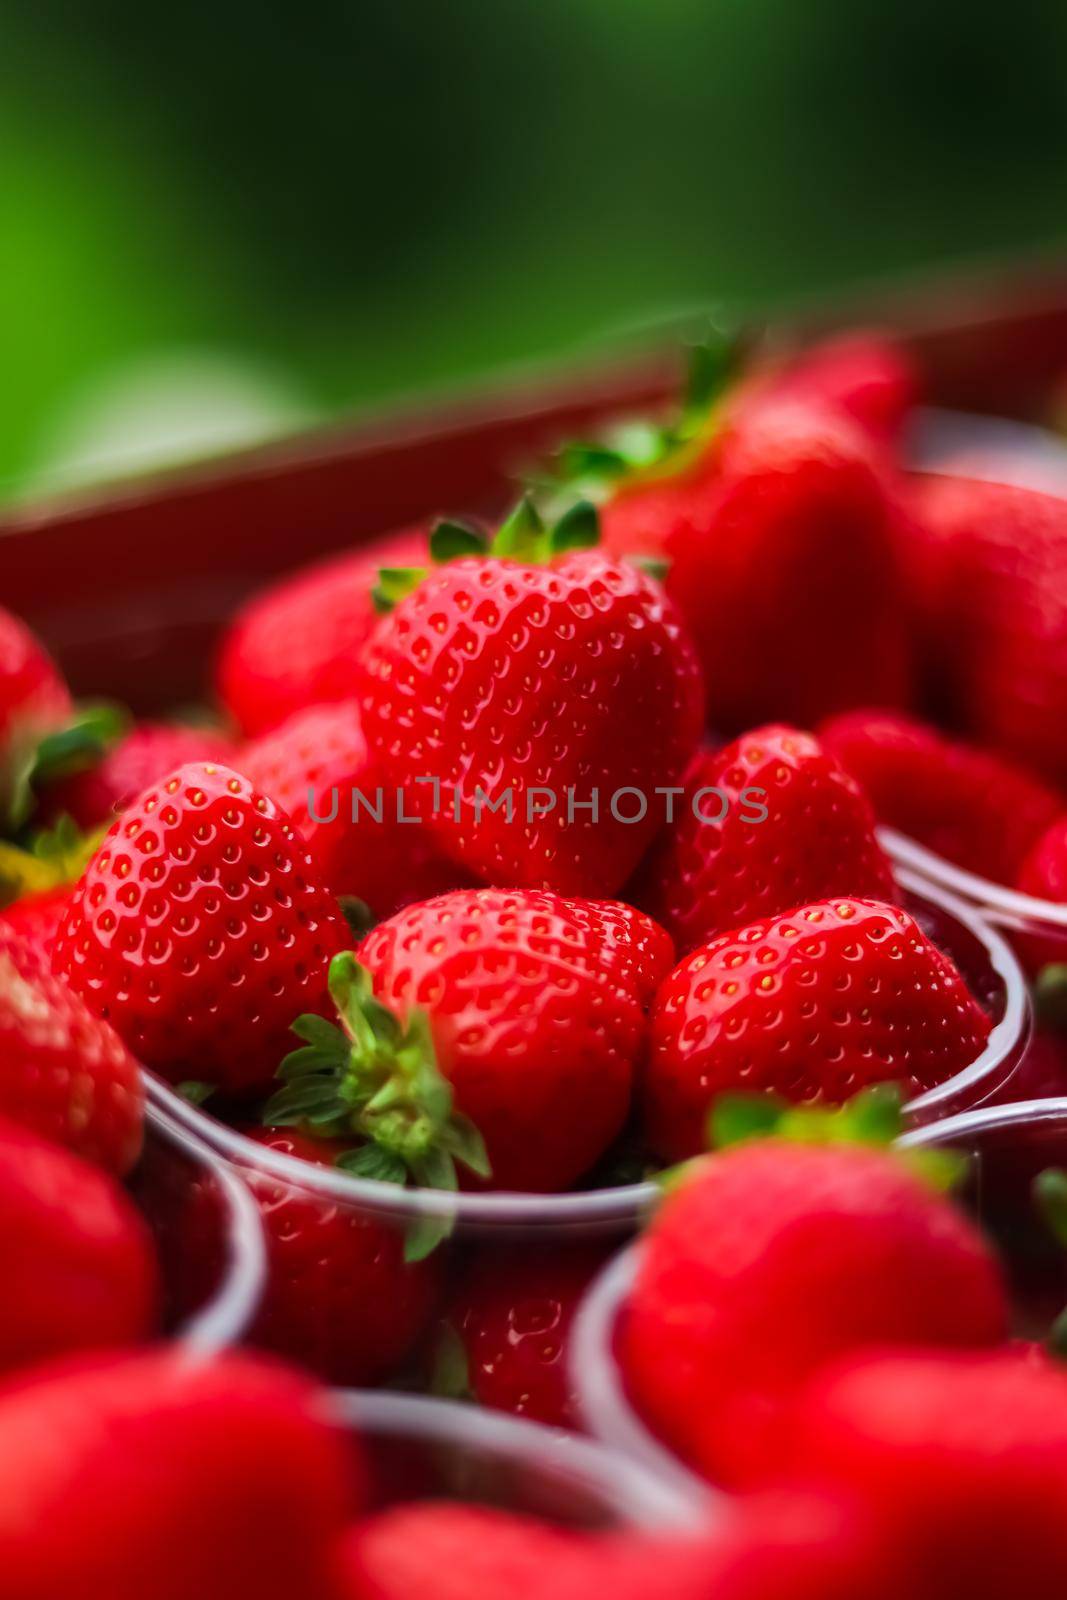 Strawberries packaged in box, sweet ripe perfect strawberry harvest, organic garden and agriculture concept